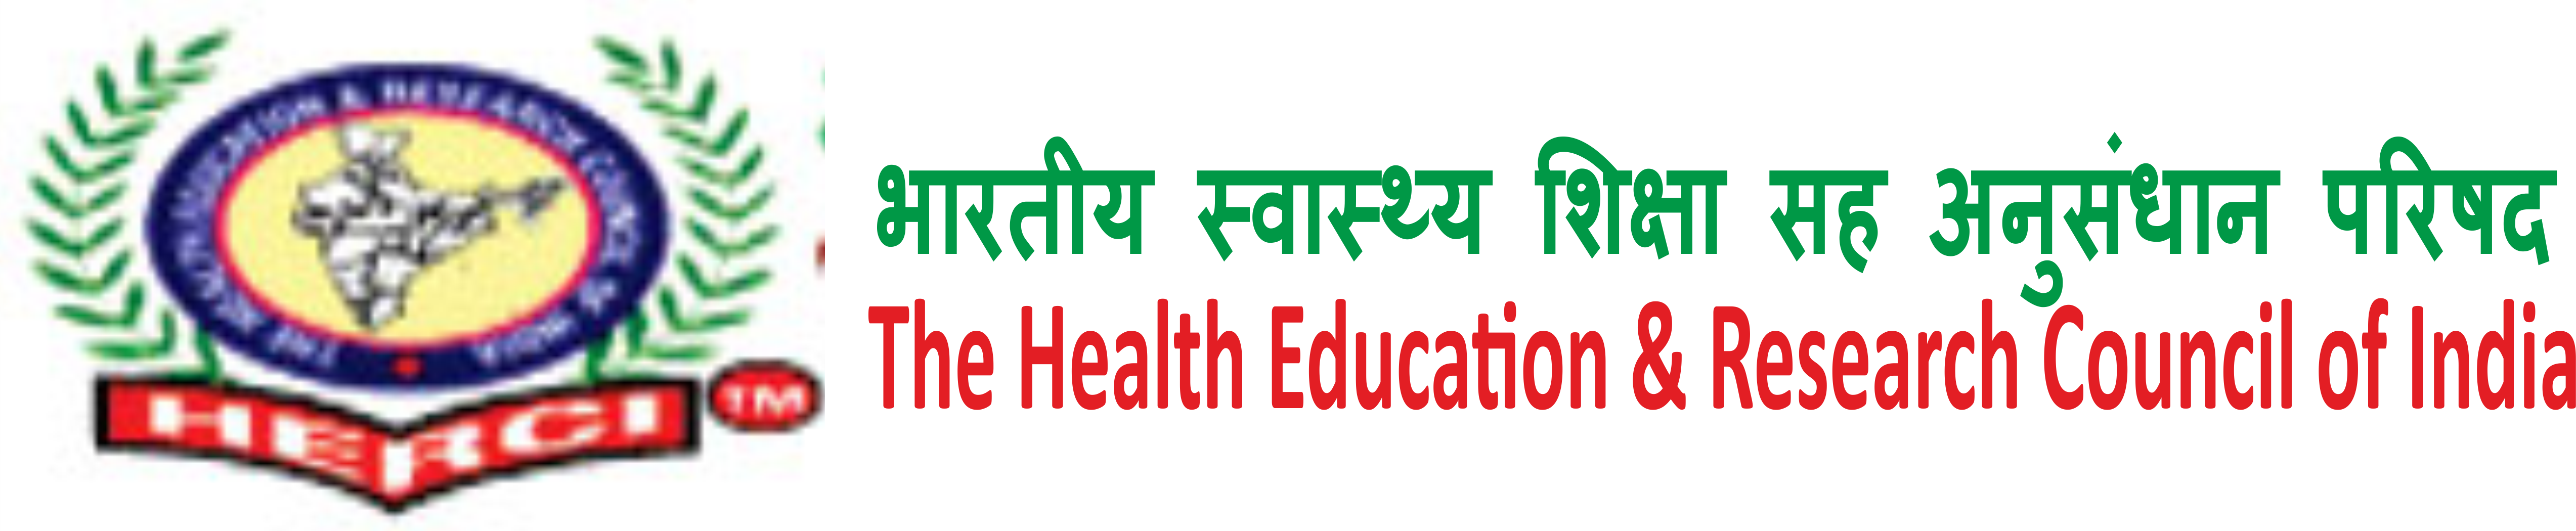 The Health Education and Research Council of India